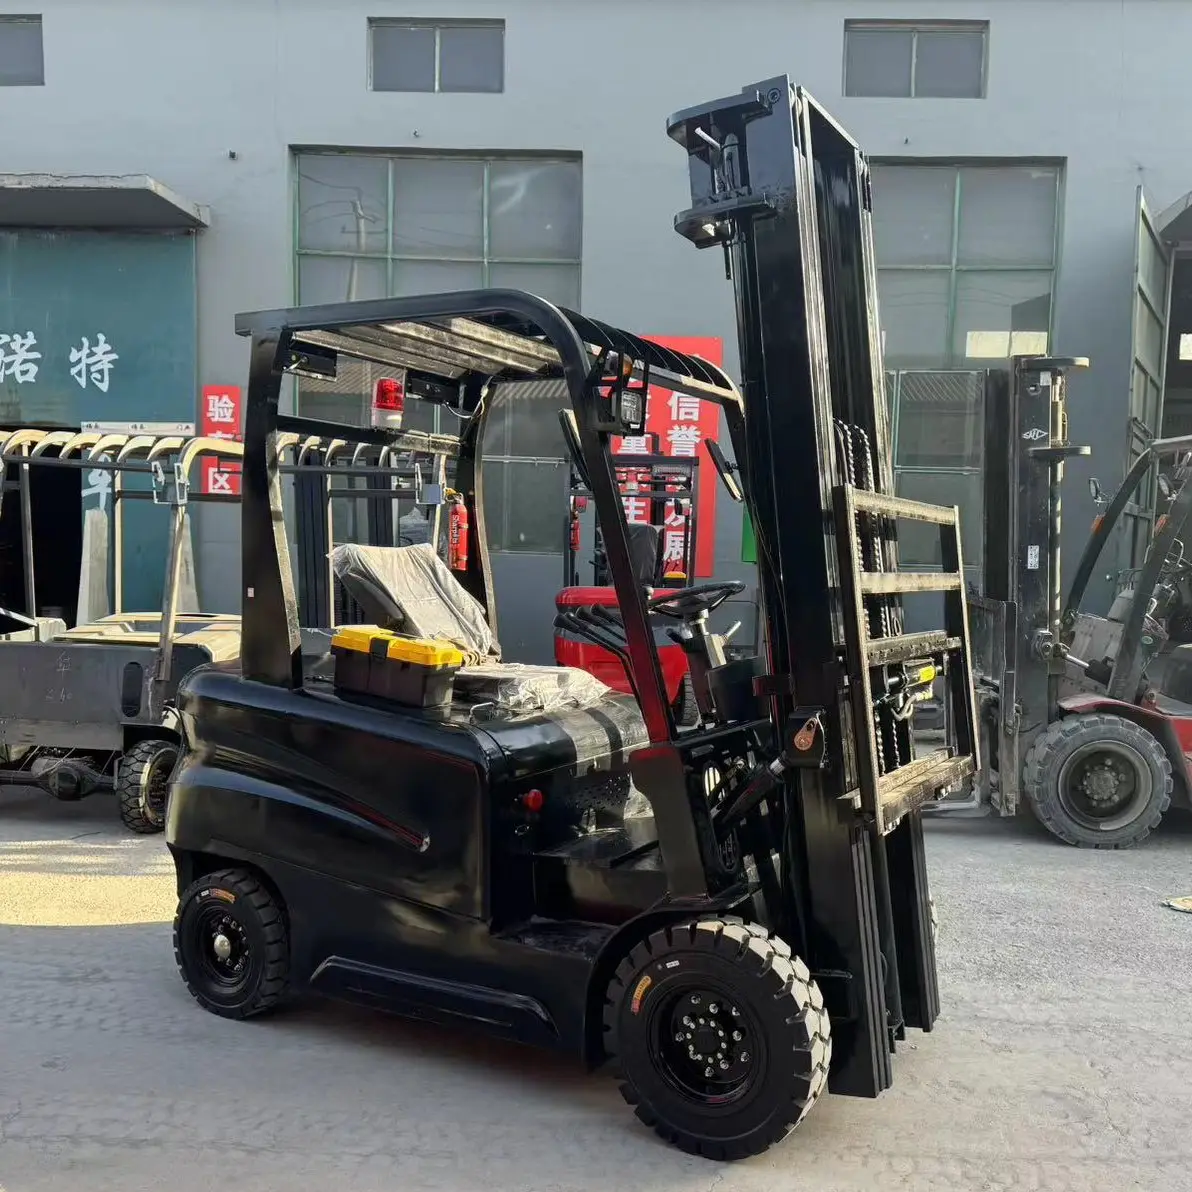 Lithium battery multifunction electric forklift truck cheap price used forklift household farm use mini forklift machine